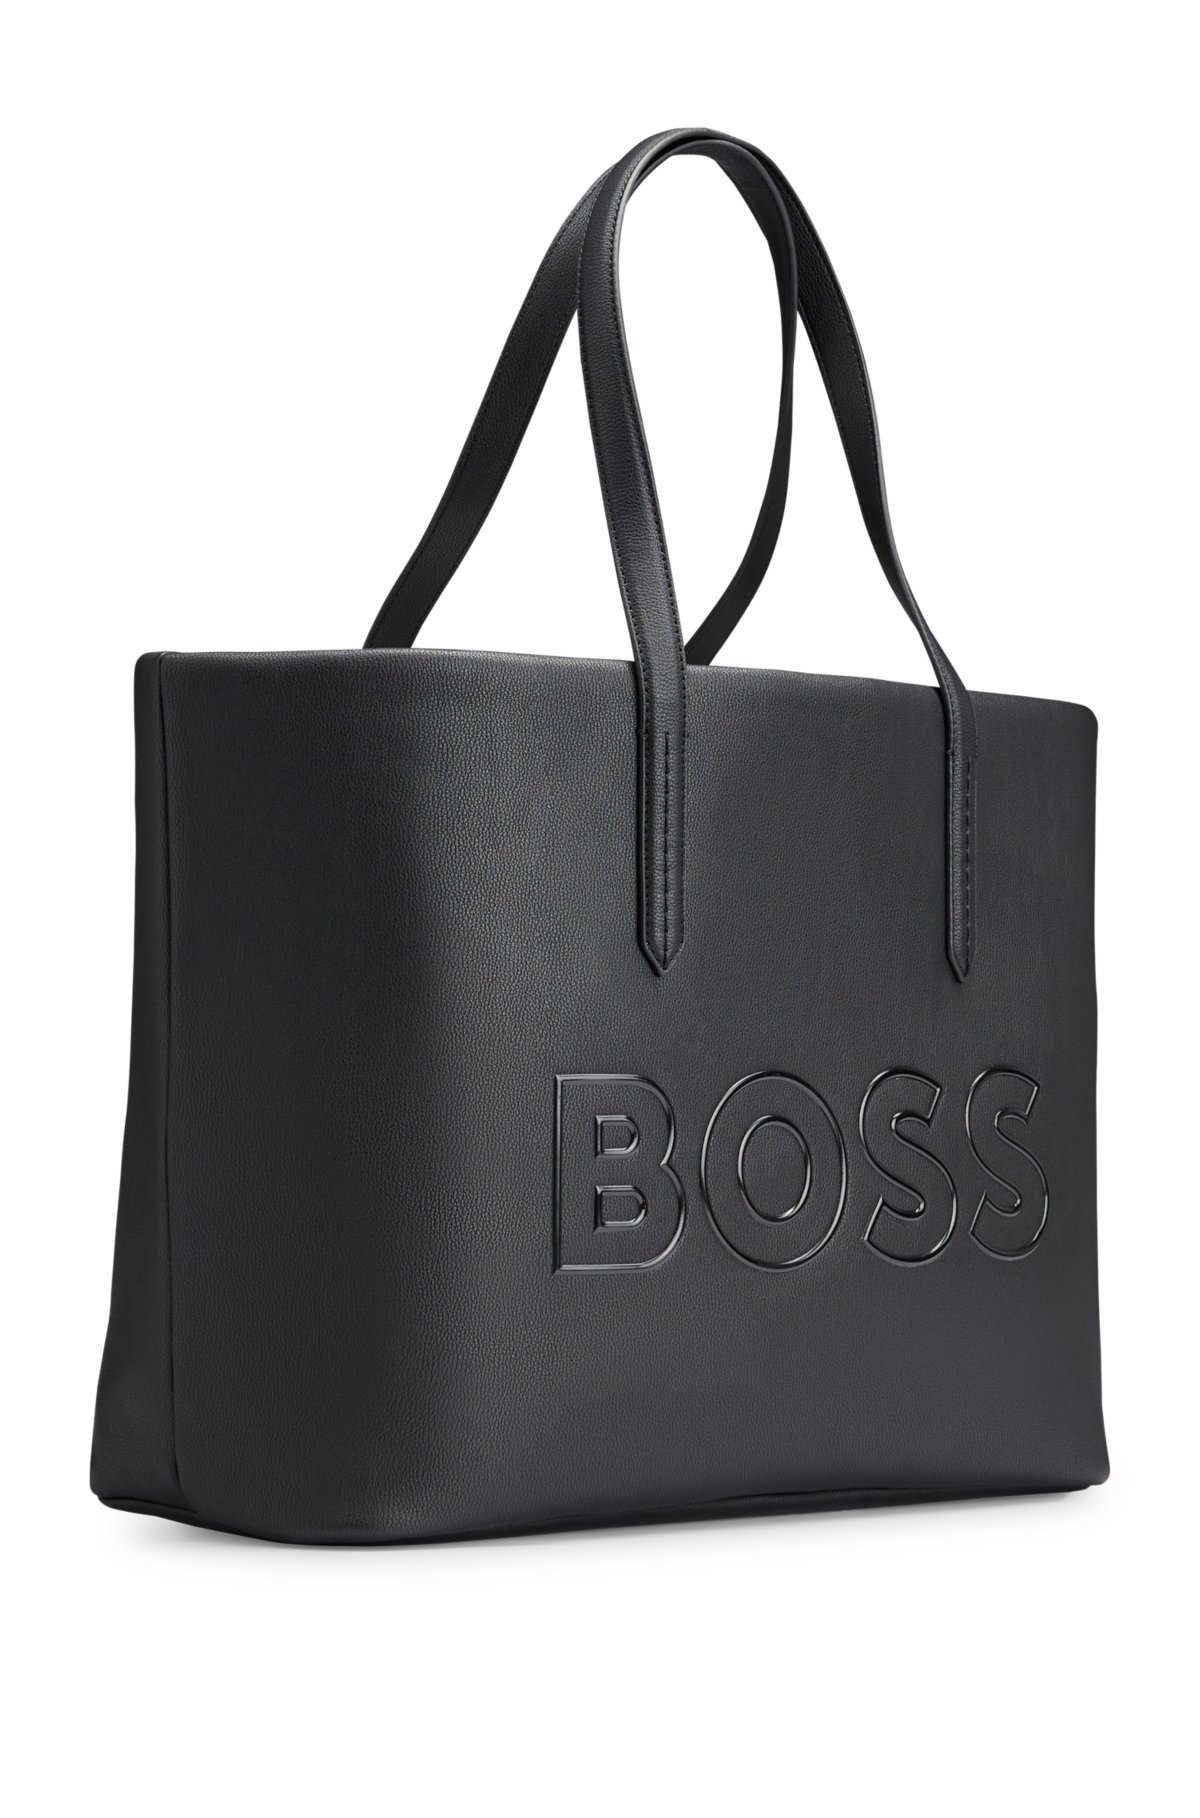 Grained faux-leather shopper bag with outline logo, Black